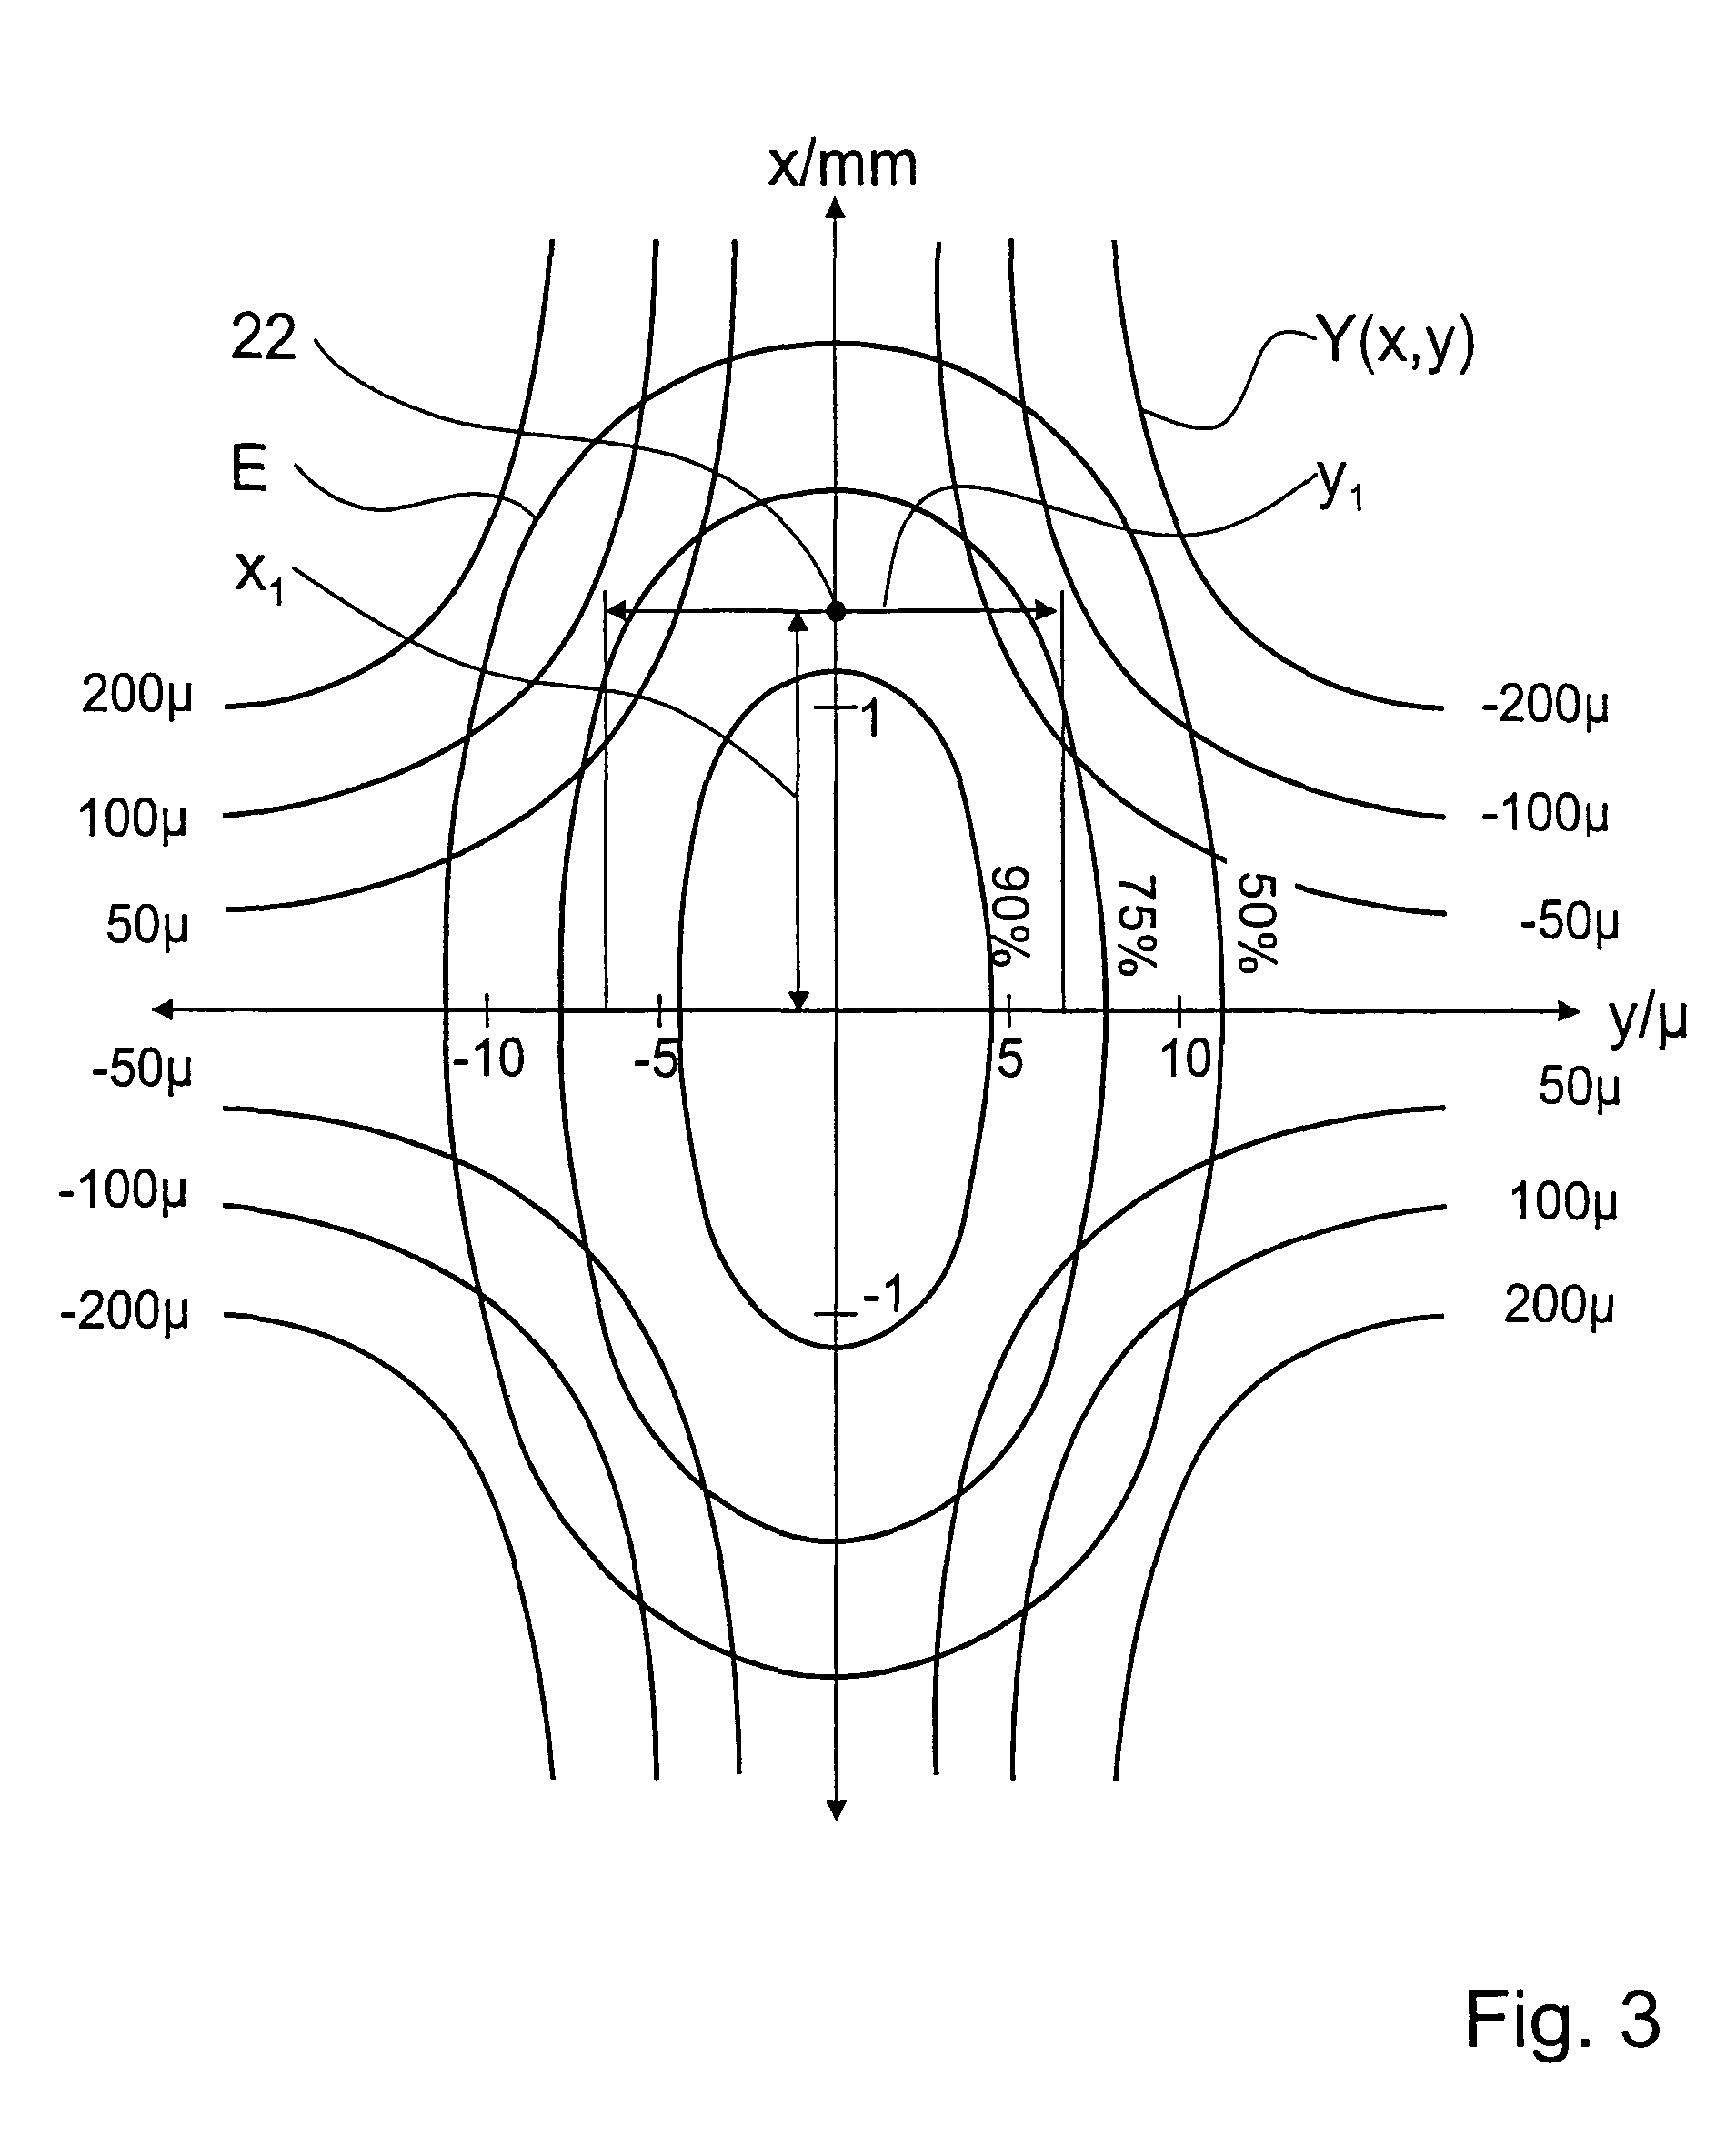 Imaging device for the stabilized imaging of an object onto a detector